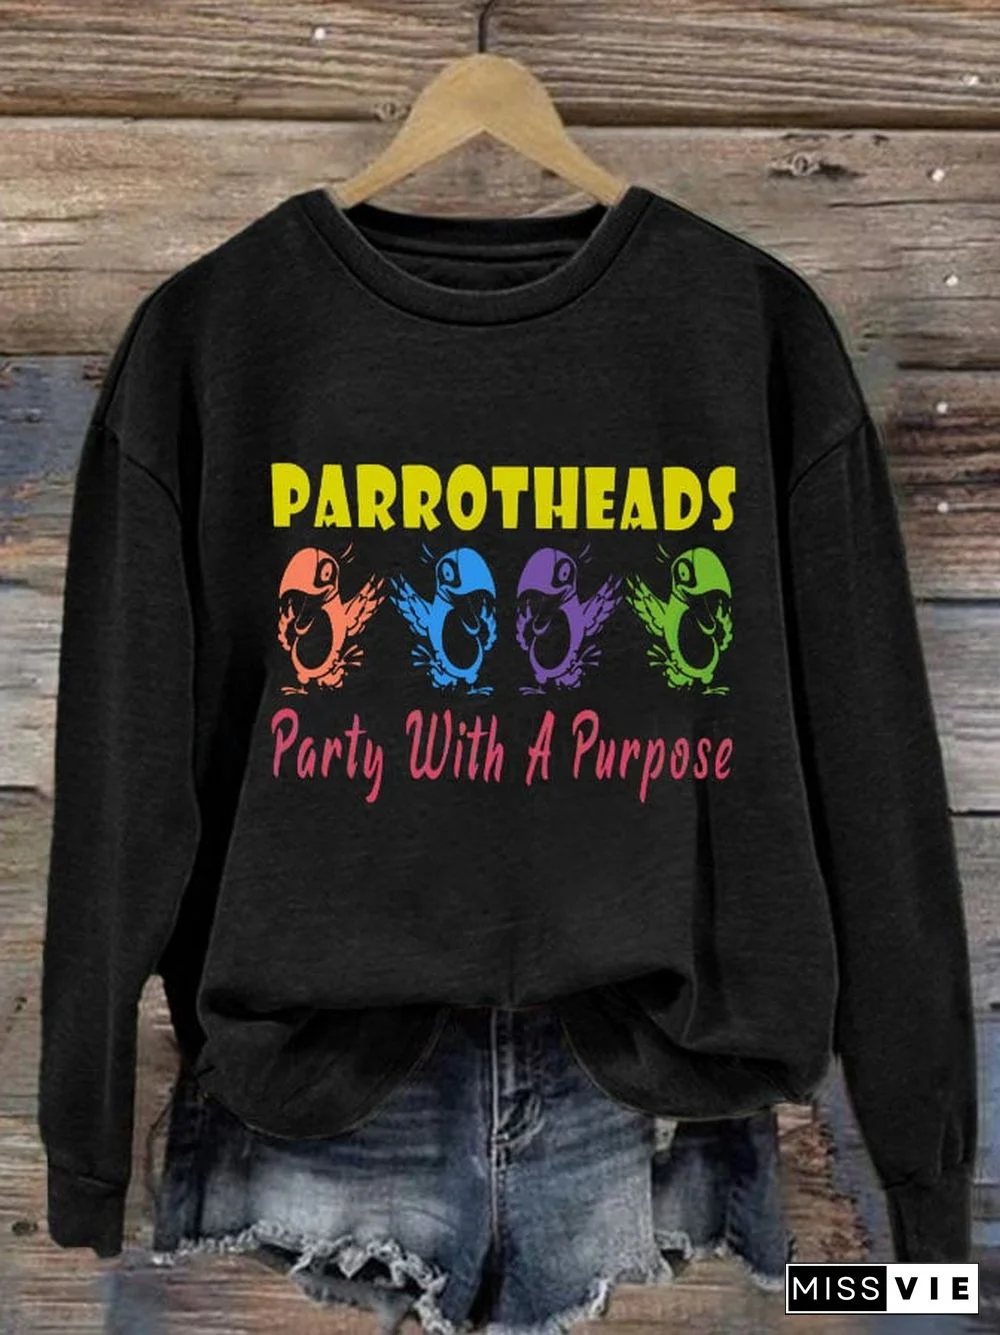 Women's Parrotheads Party With a Purpose Crew Neck Sweatshirt